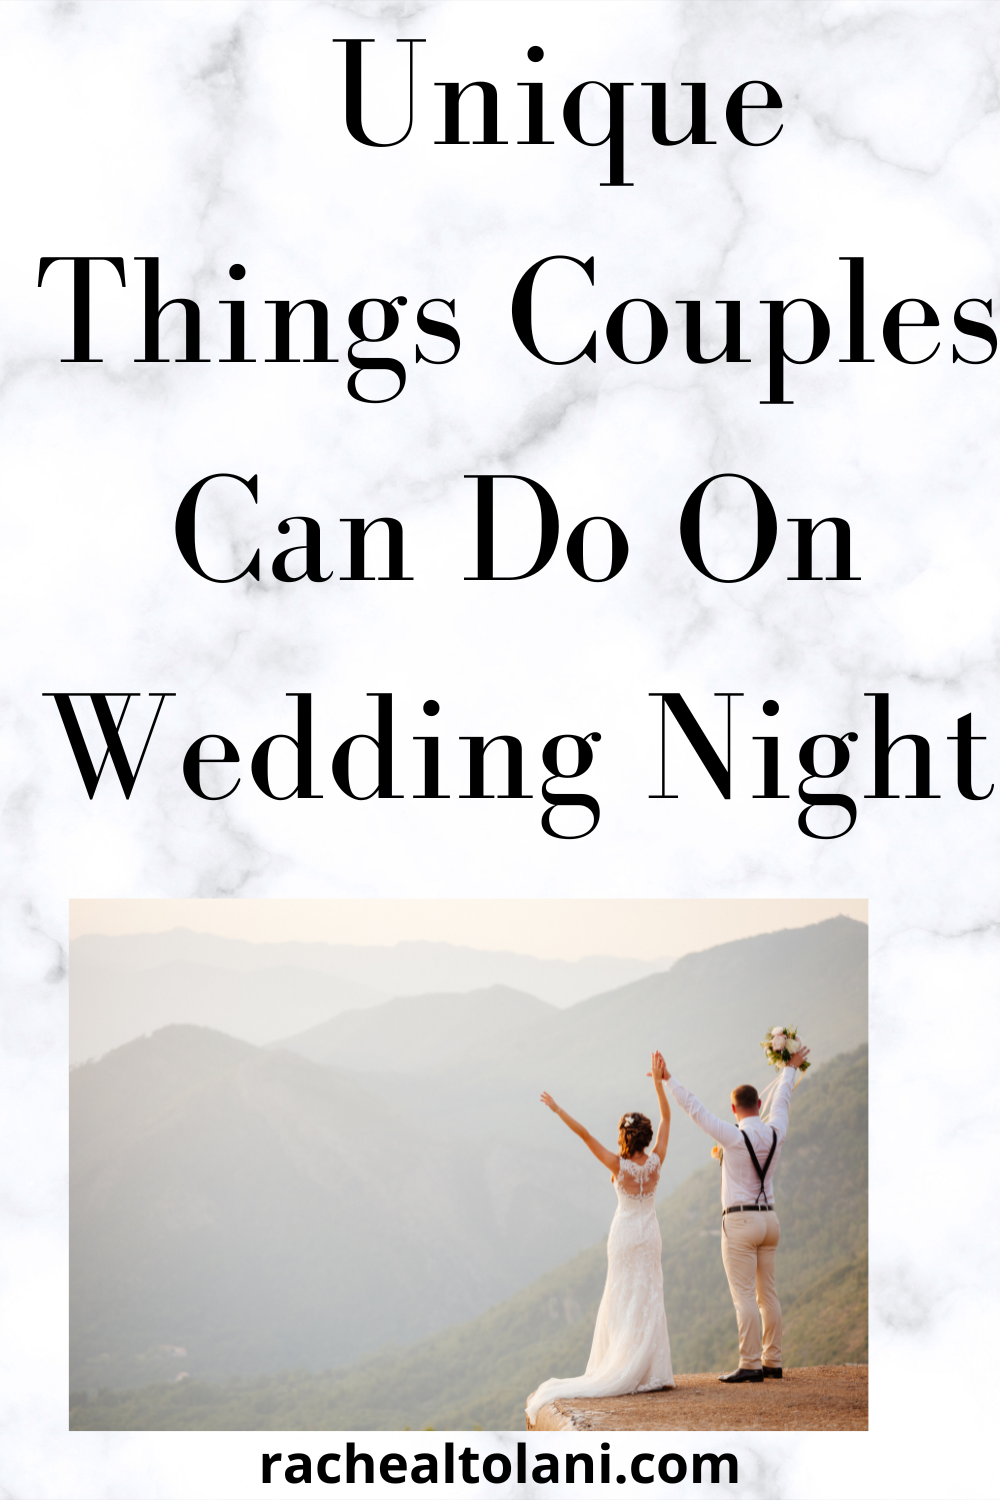 Things Couples Can Do On Wedding Night